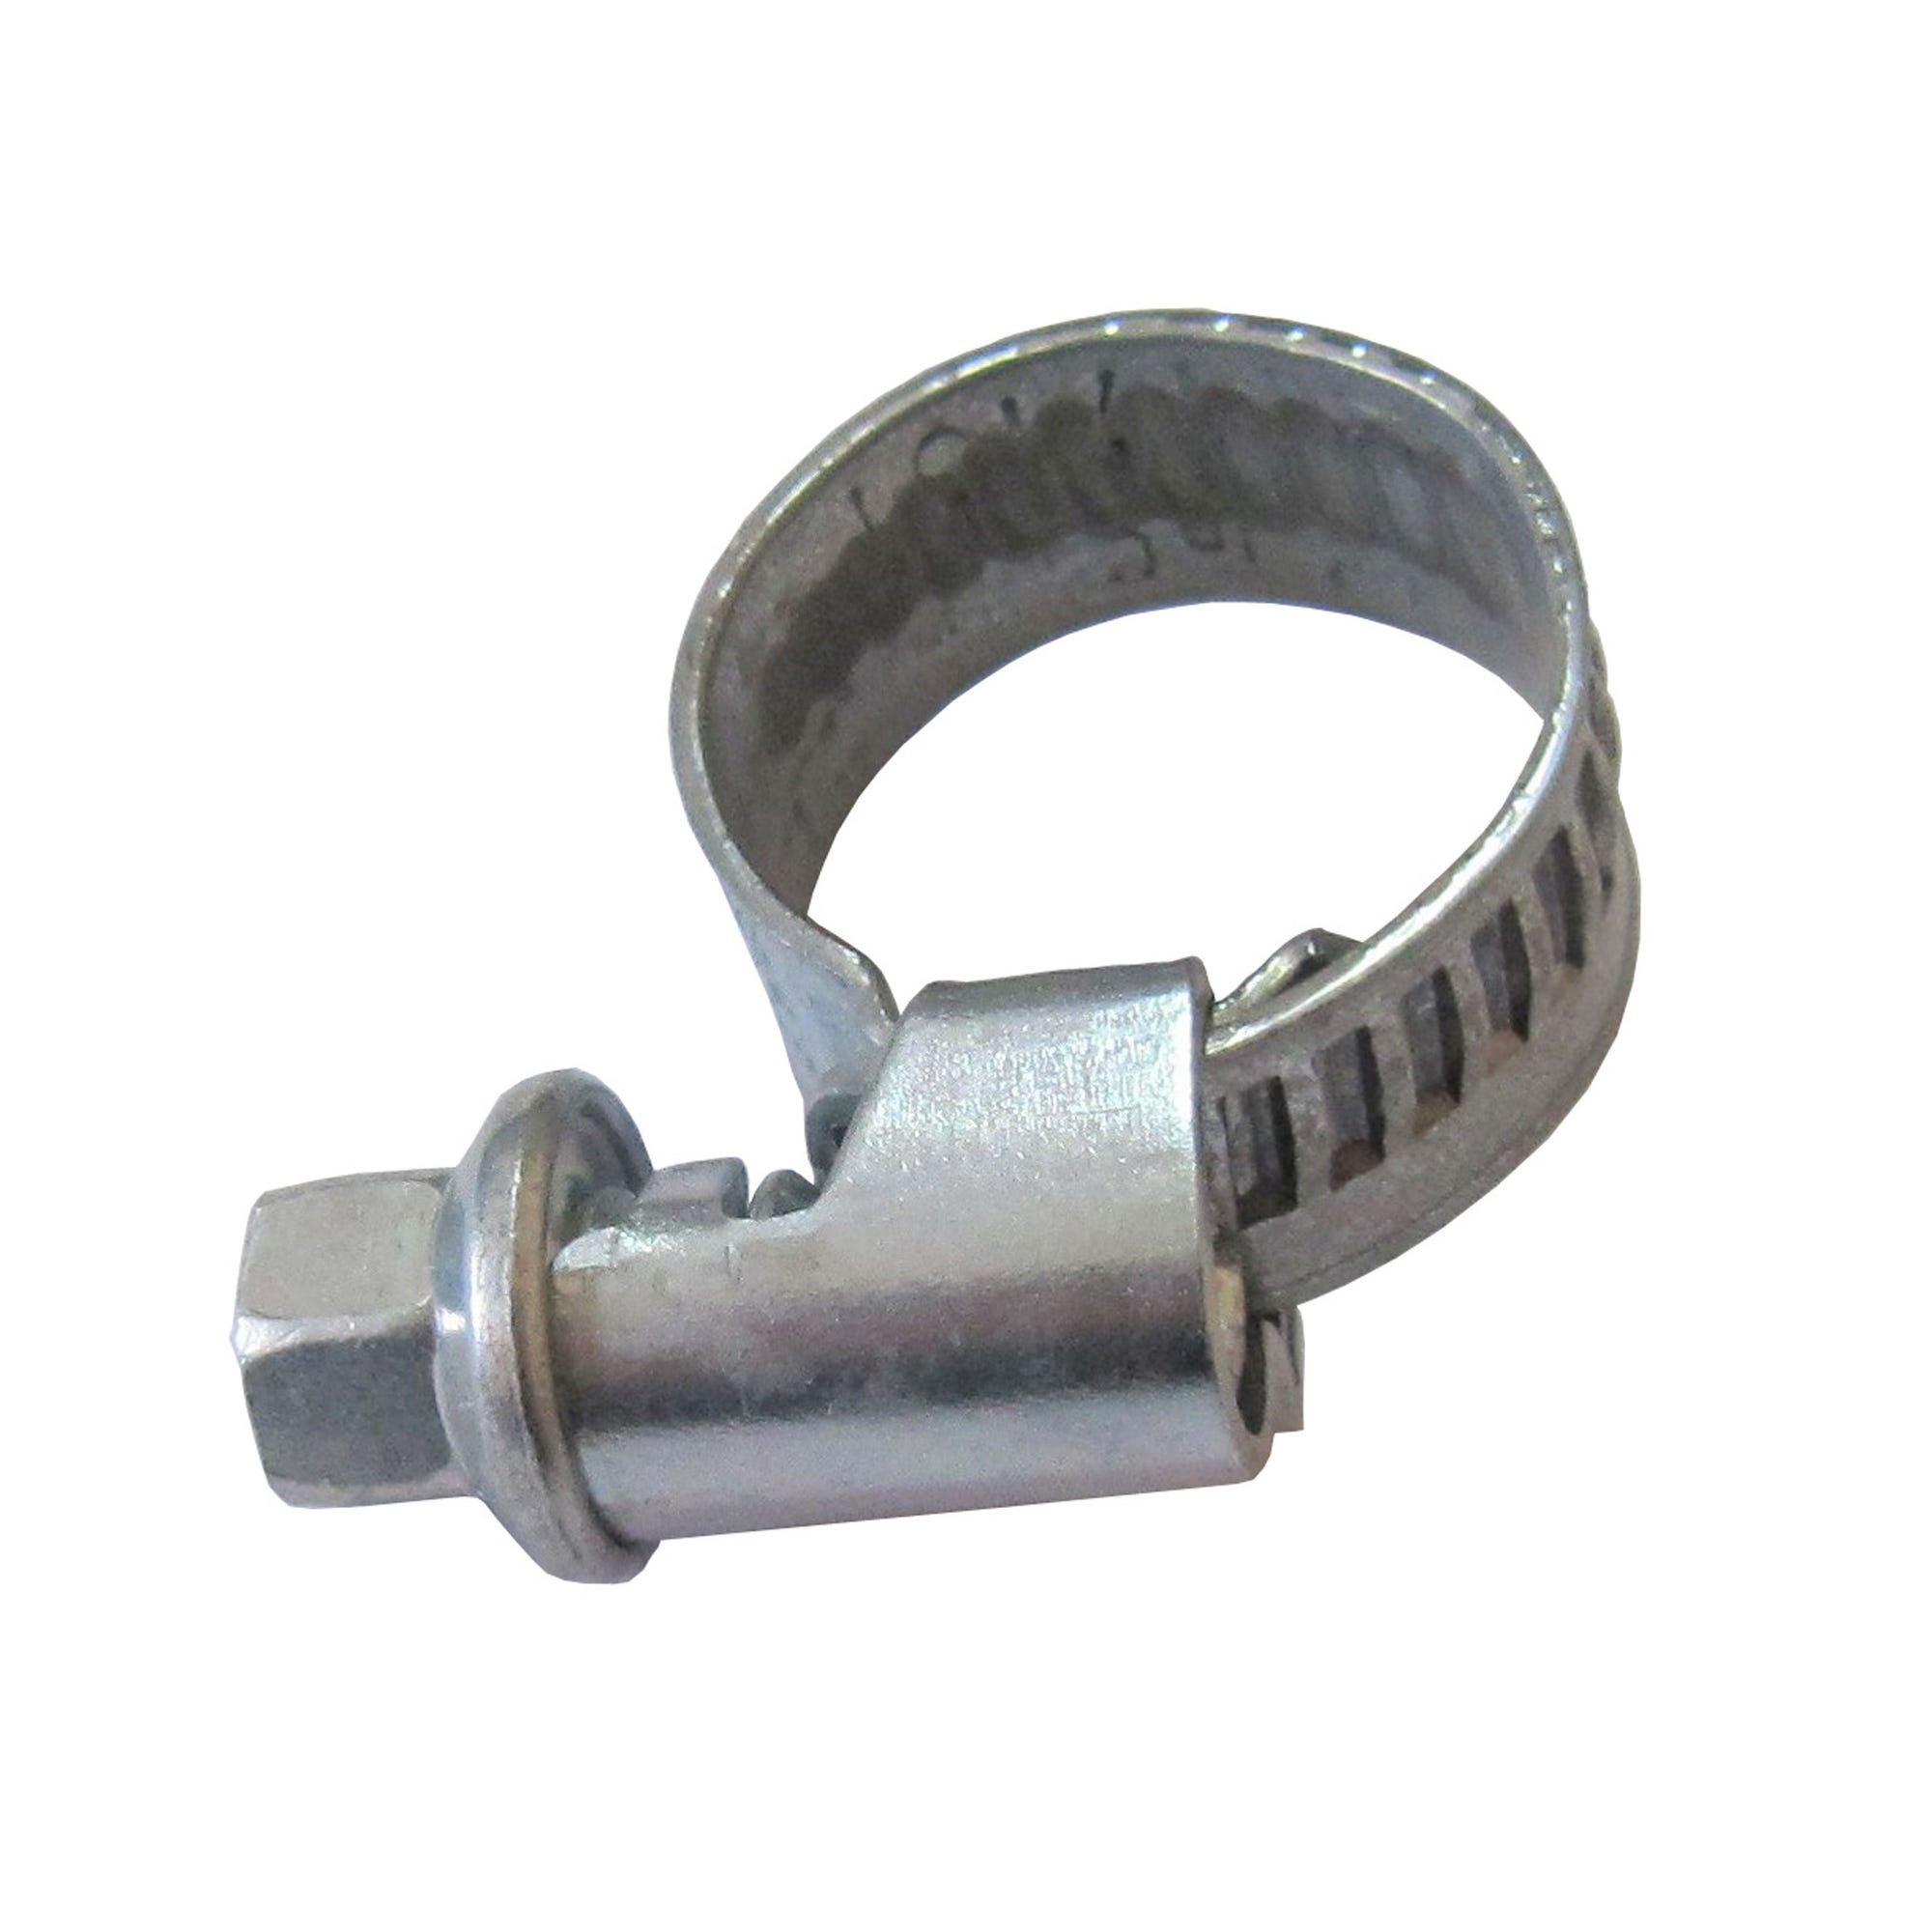 10 colliers inox d.25 a 40mm lg 9 mm 0